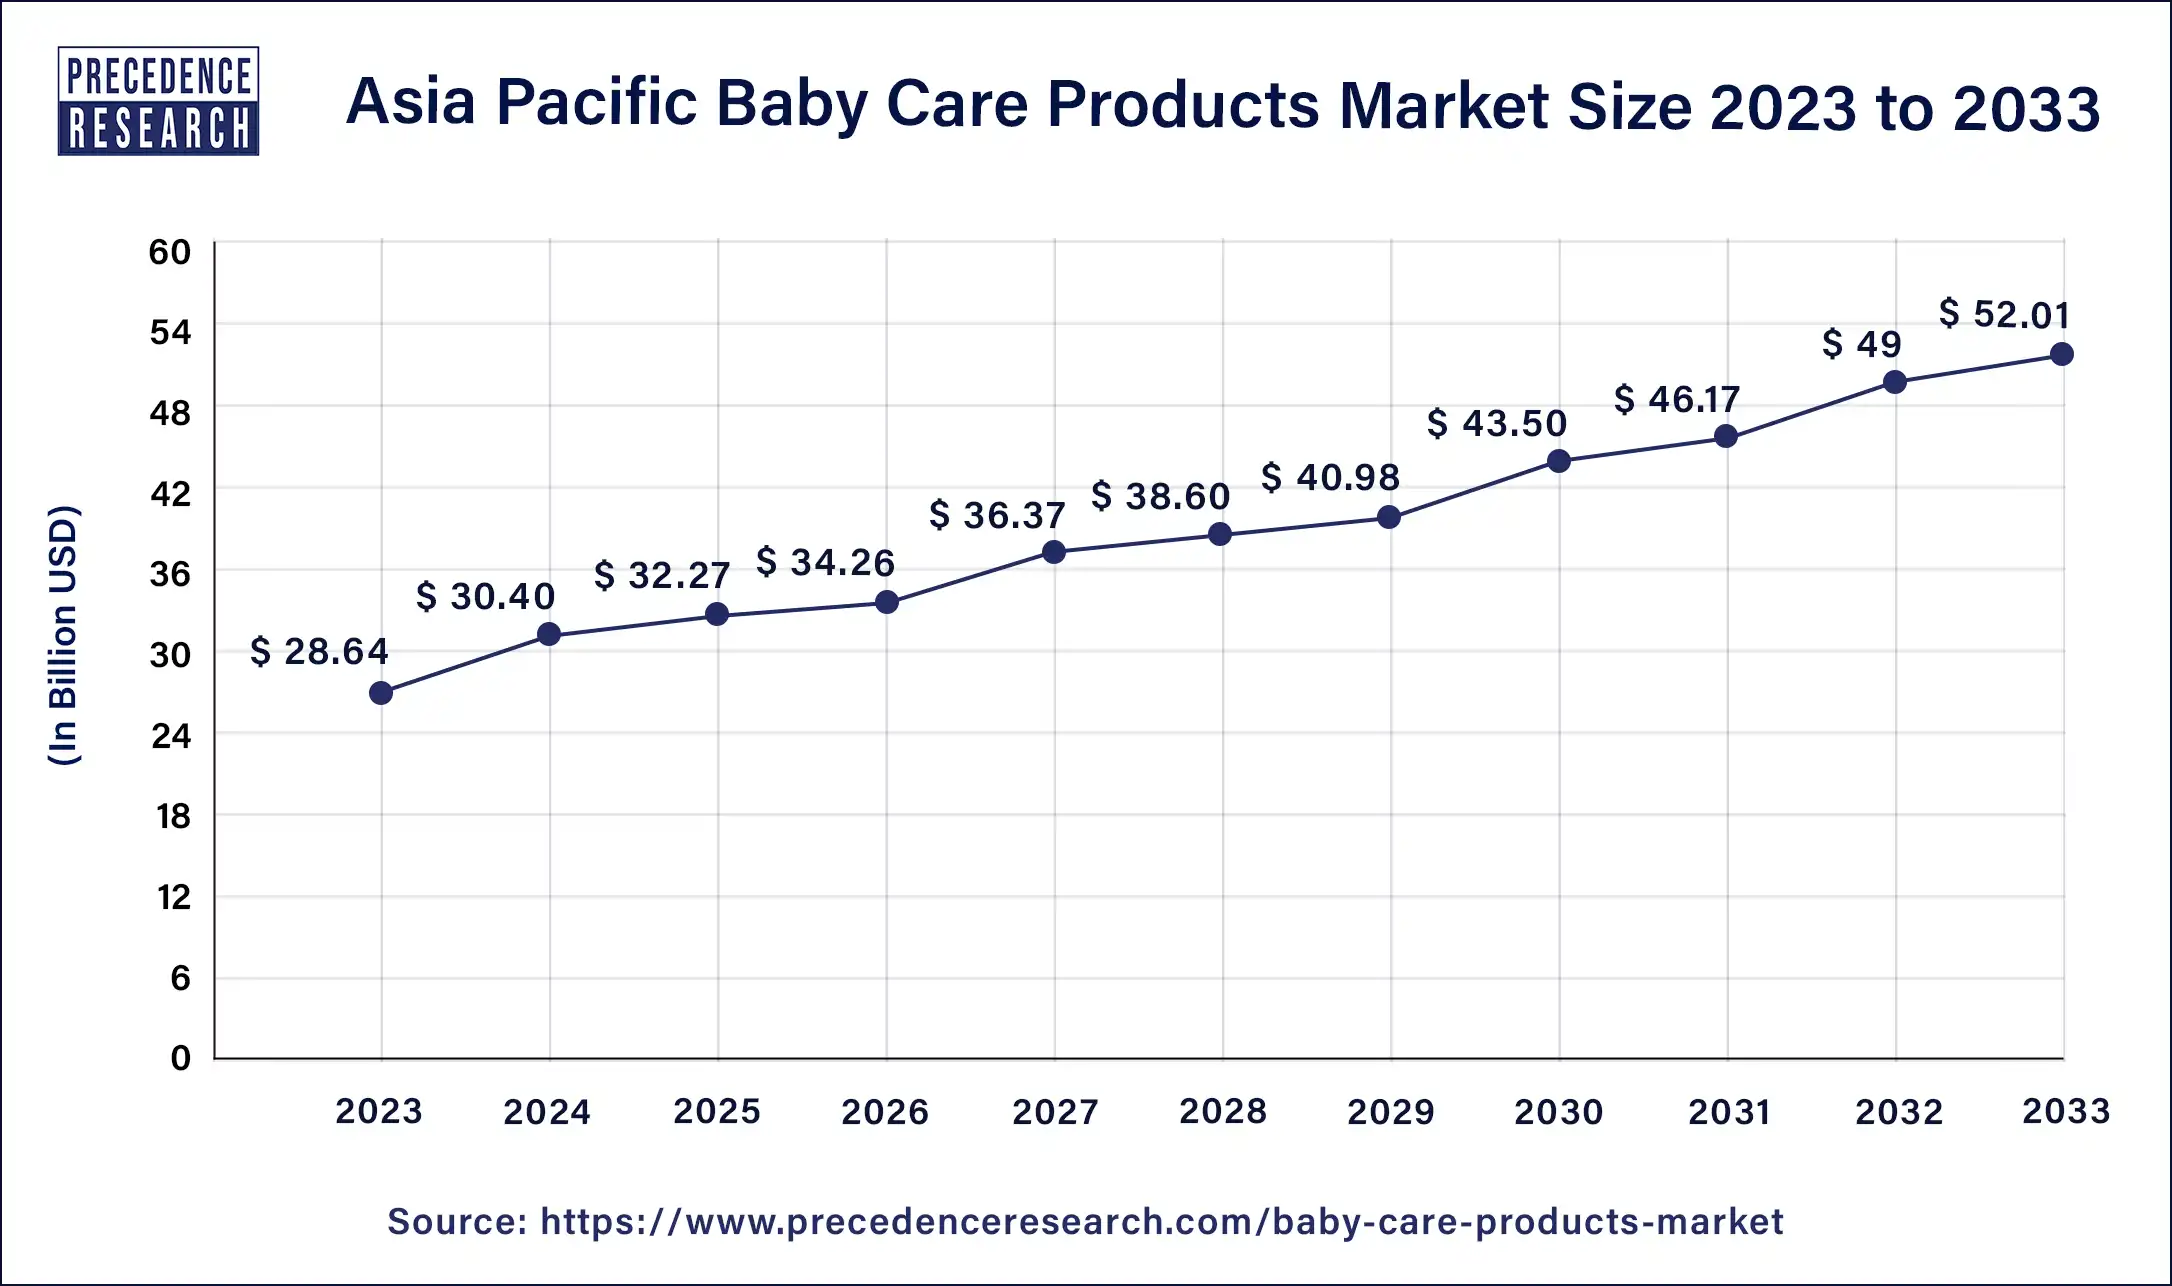 Asia Pacific Baby Care Products Market Size 2024 to 2033